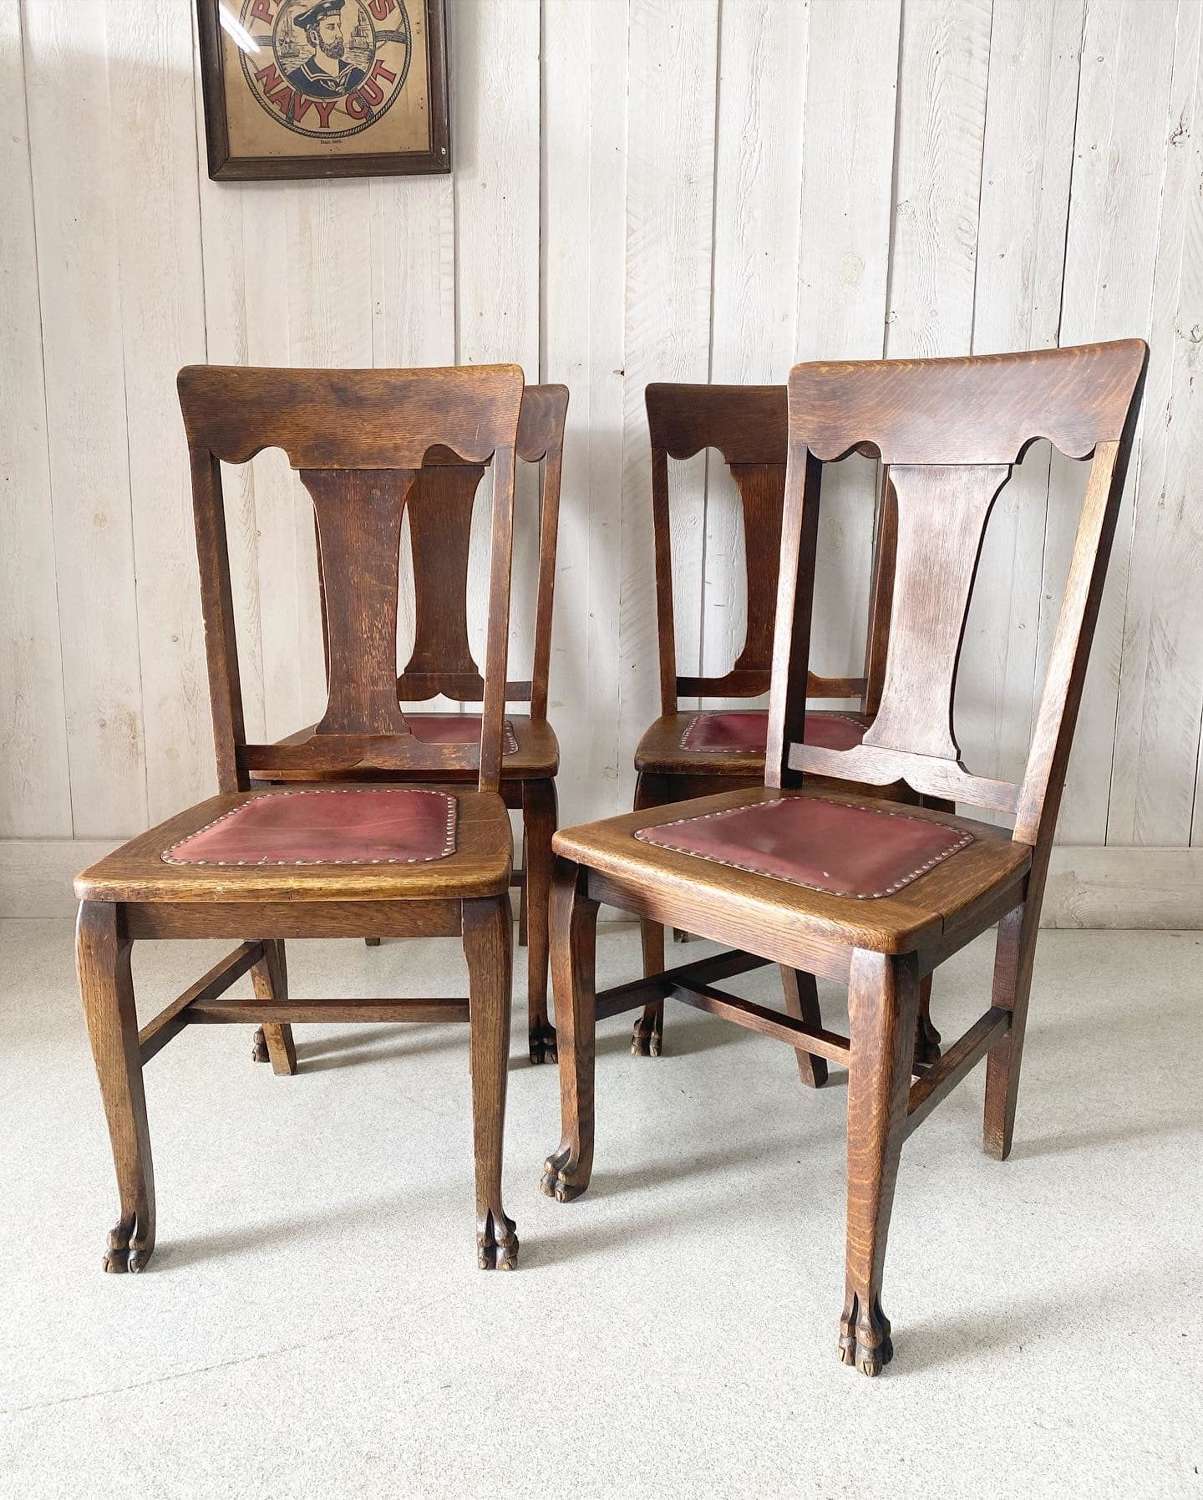 Set of Four Victorian Chairs